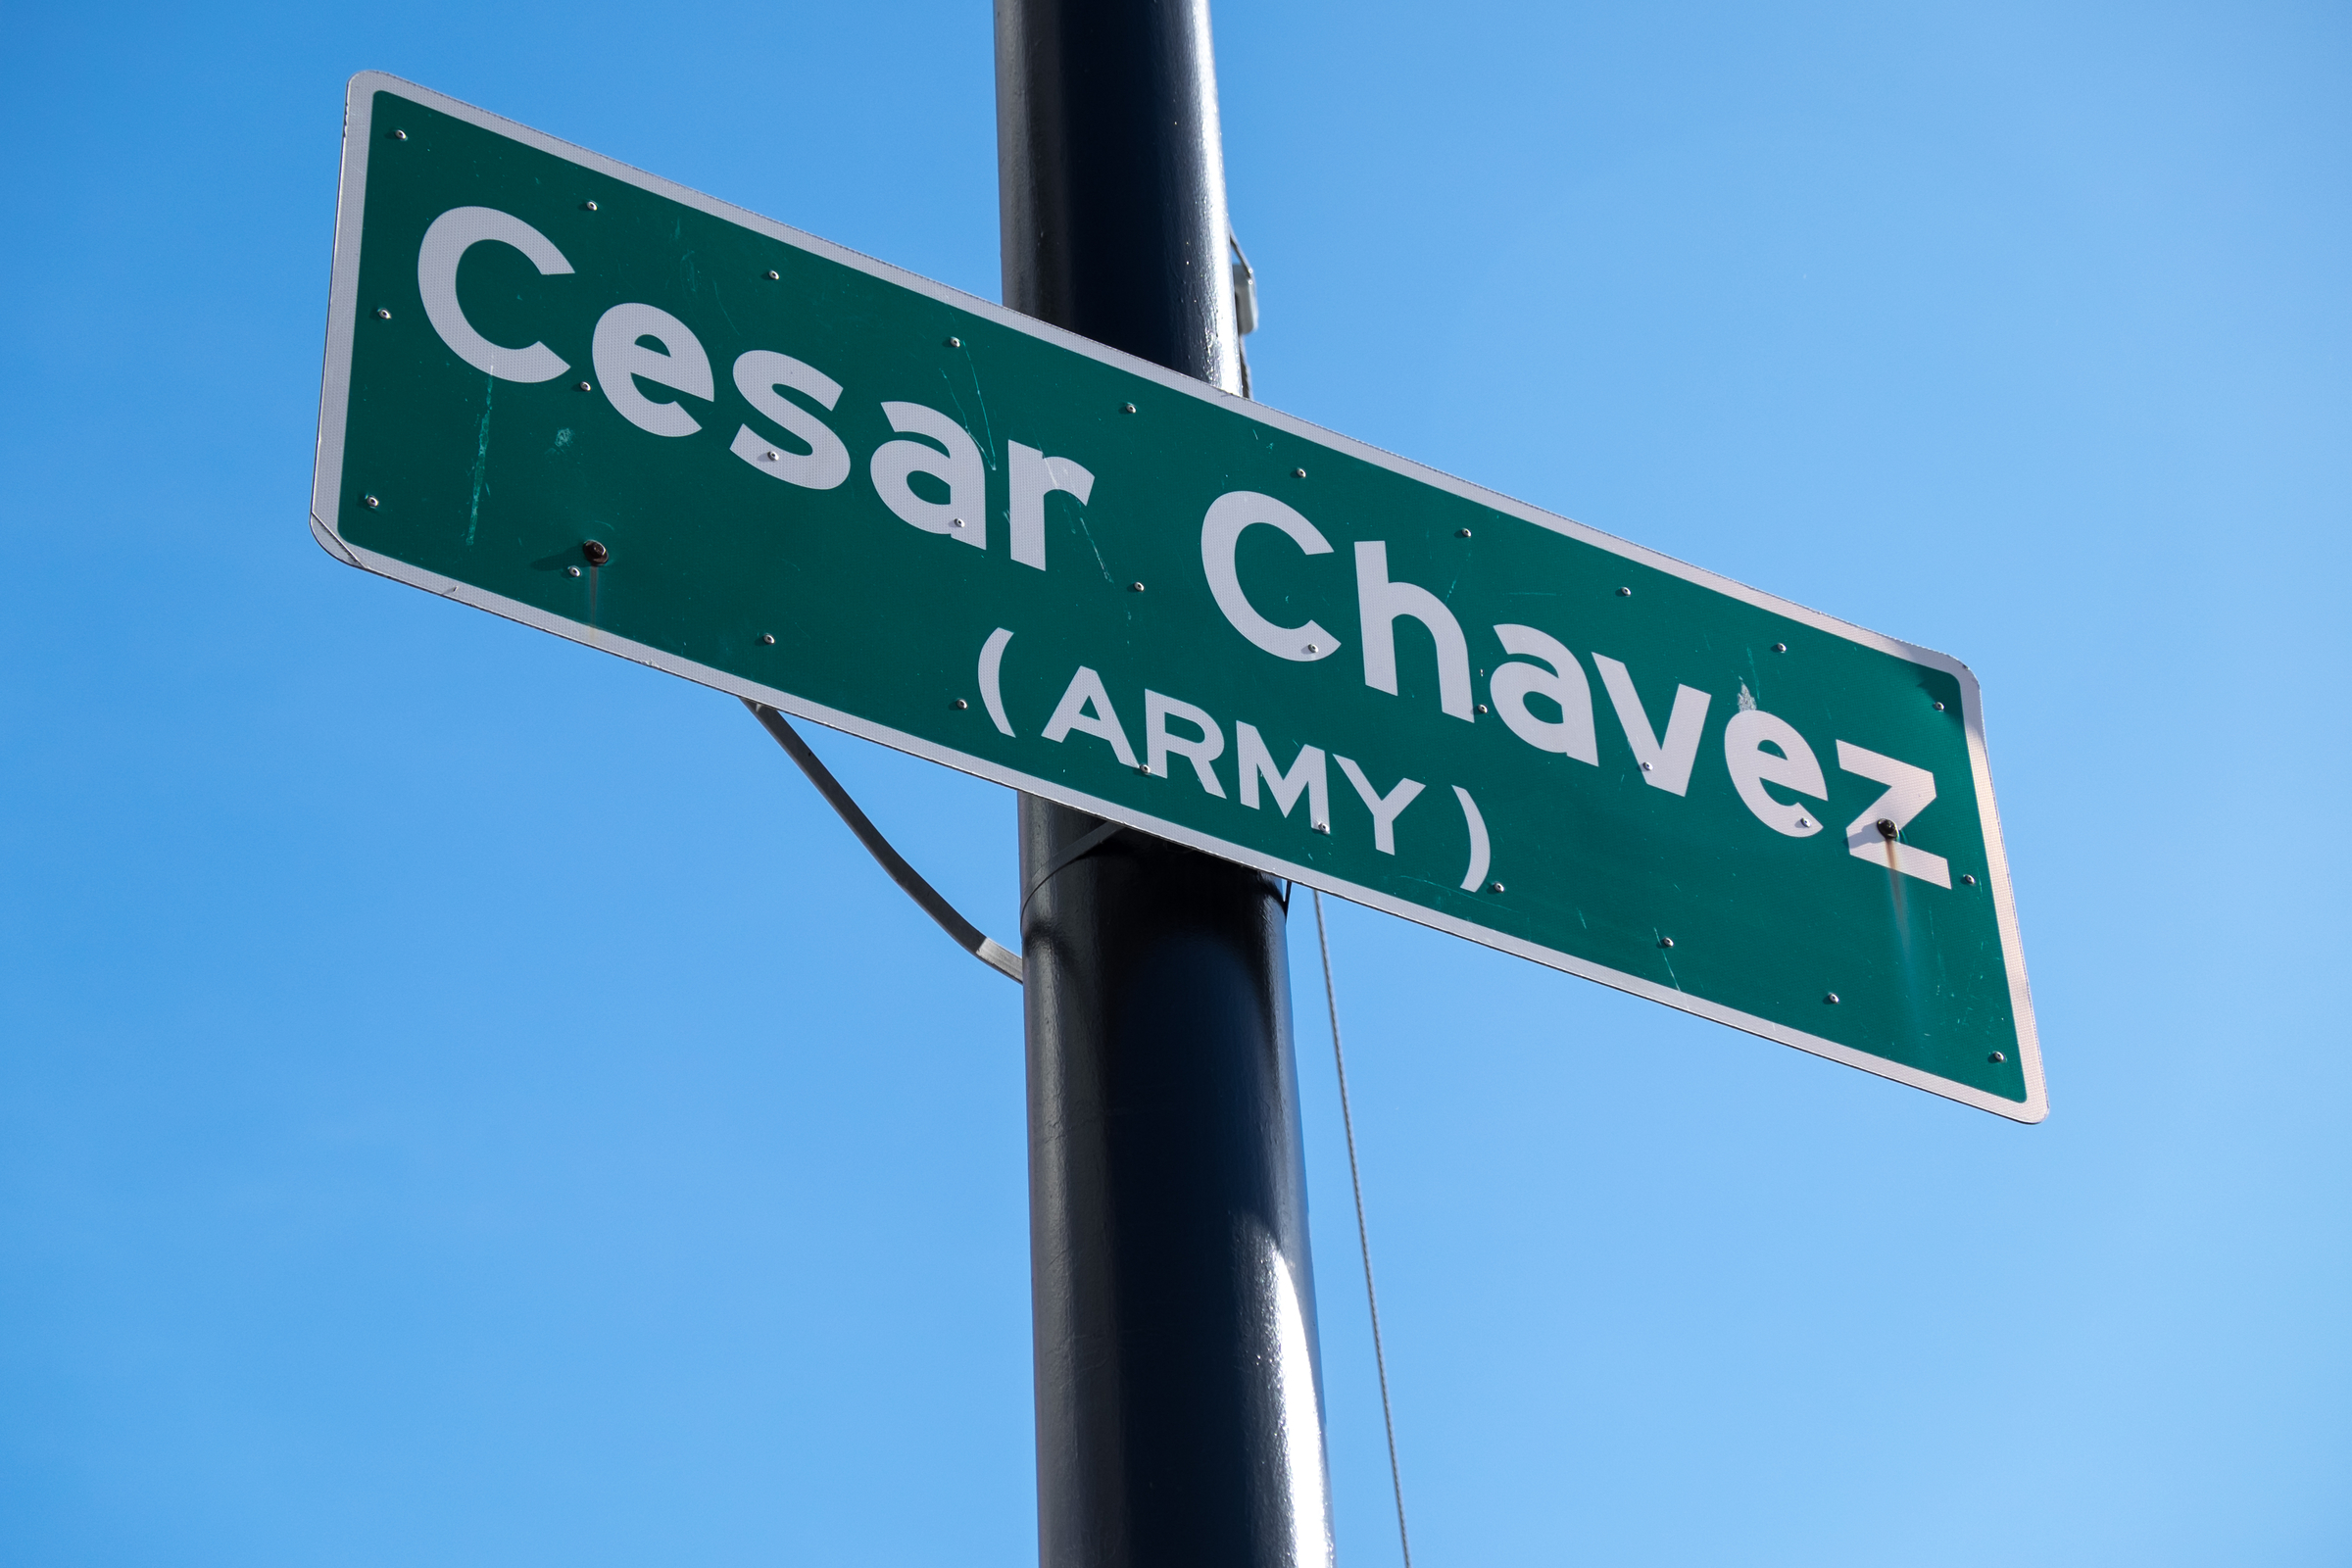 Low-angle photograph of a street sign: "Cesar Chavez (Army)" with a bright blue sky in the background